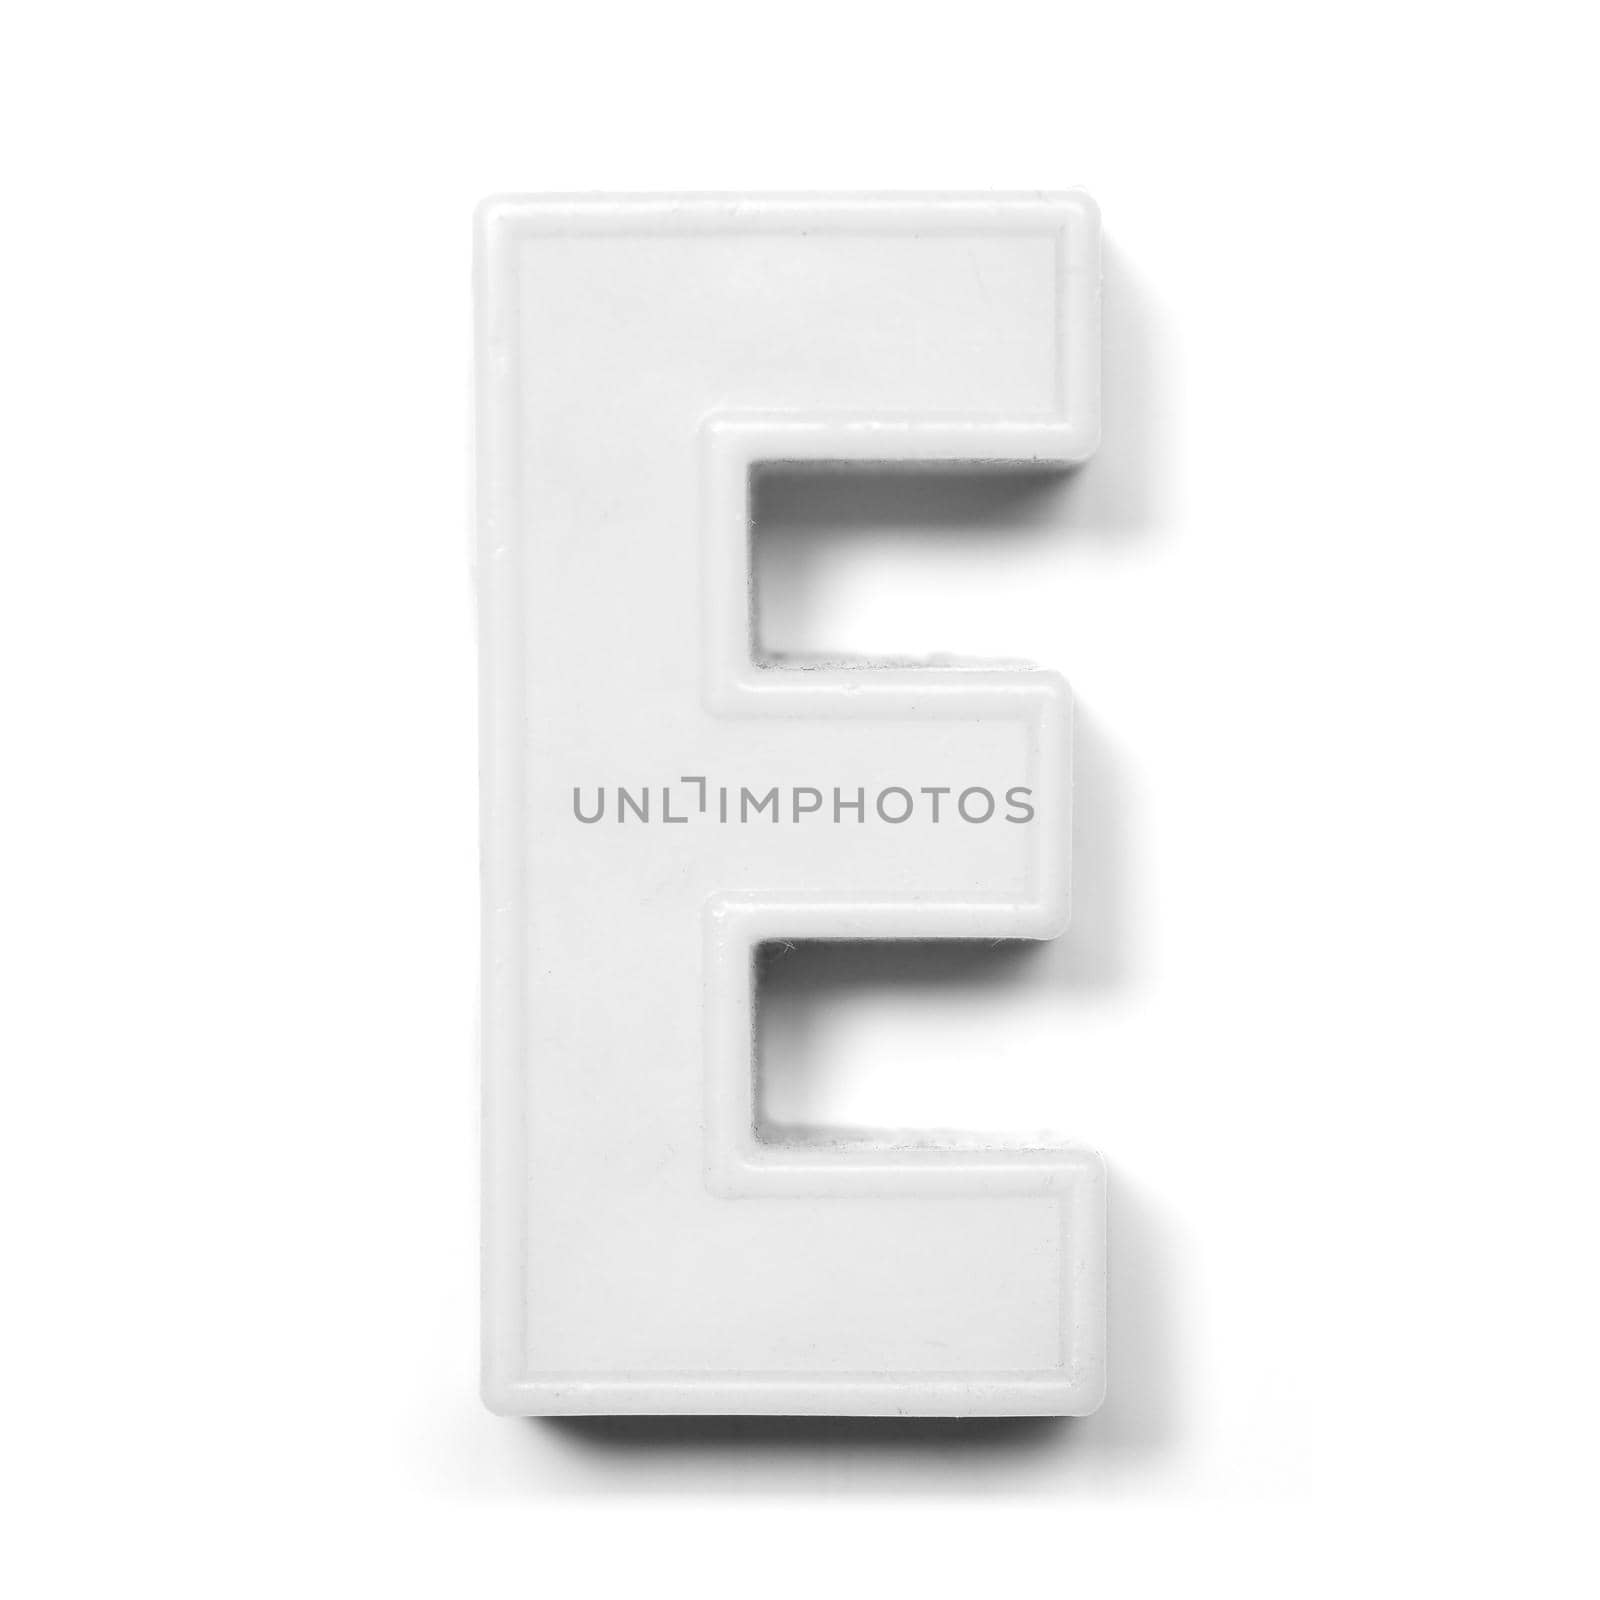 Magnetic uppercase letter E of the British alphabet in black and white